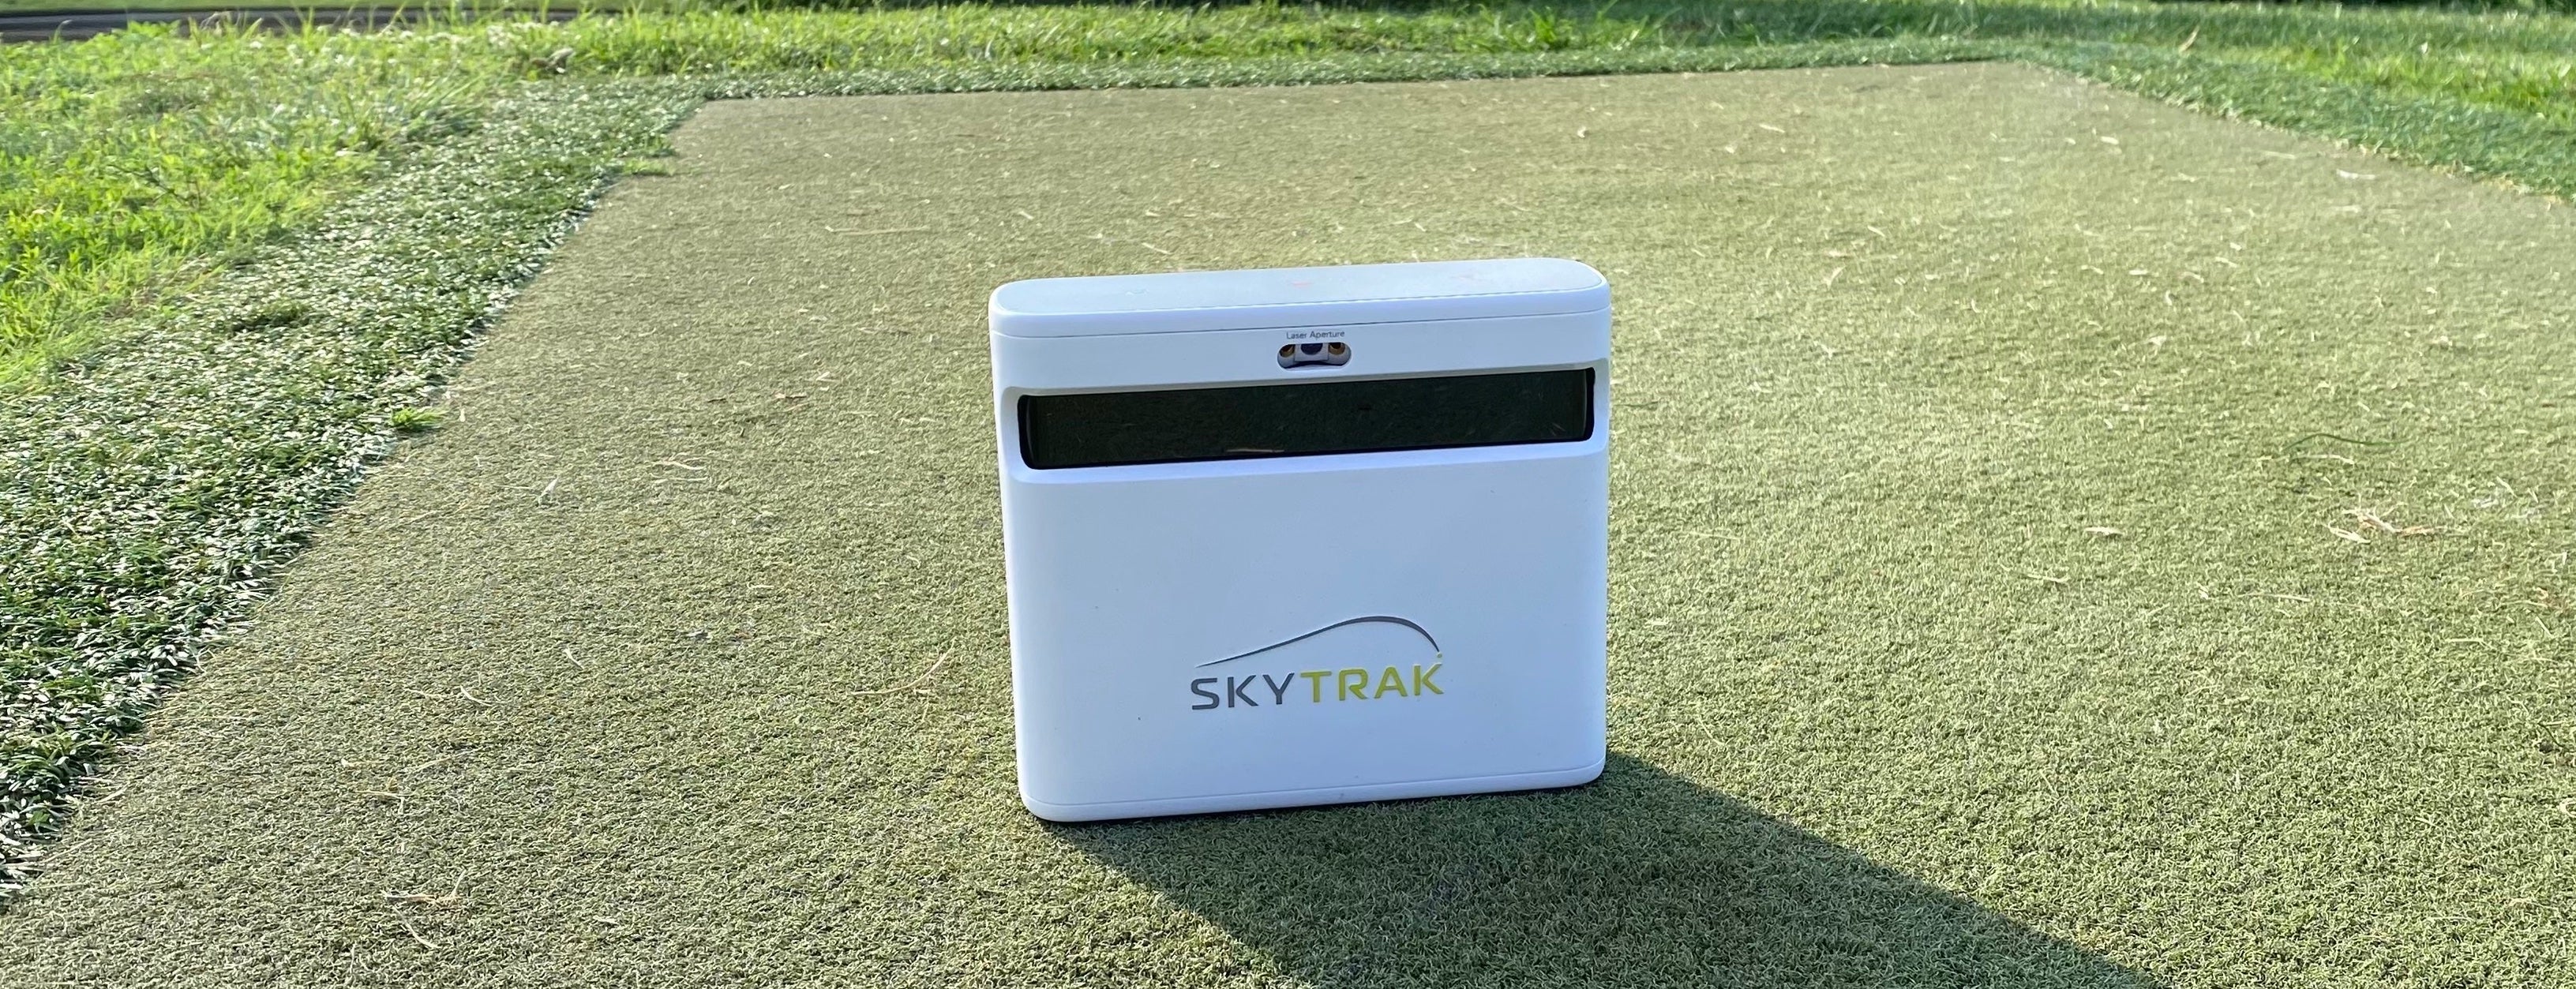 An In-Depth Review of the Long-Awaited SkyTrak+ Golf Launch Monitor: Is it Worth the Price?